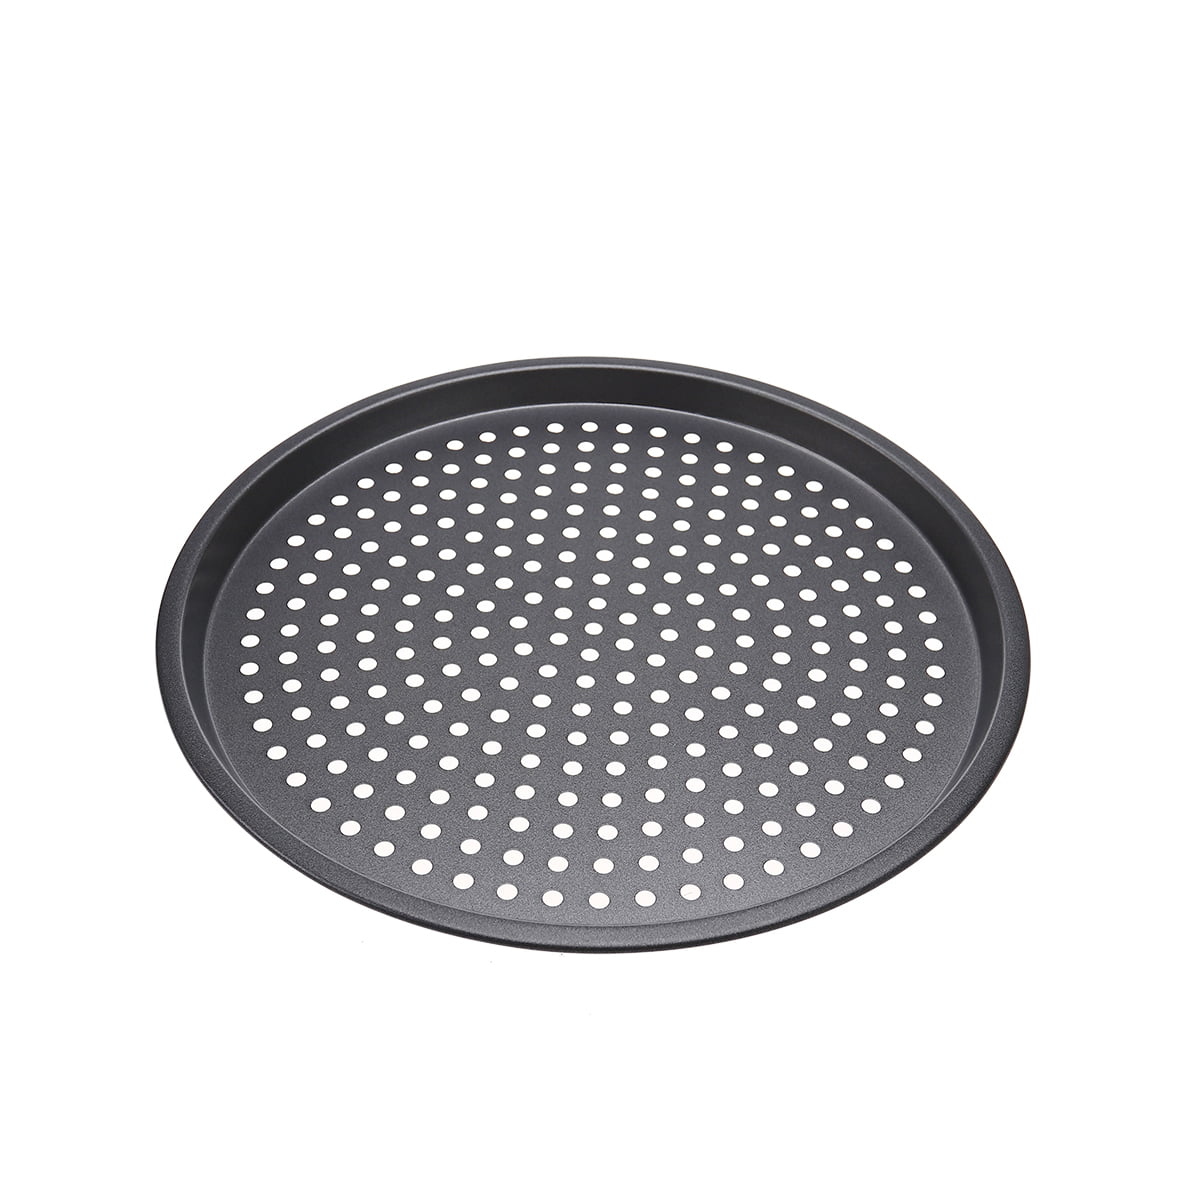 10 inch CZ-XING Pizza Crisper Tray for Oven Aluminum Pizza Baking Tray Mesh Grill Pan